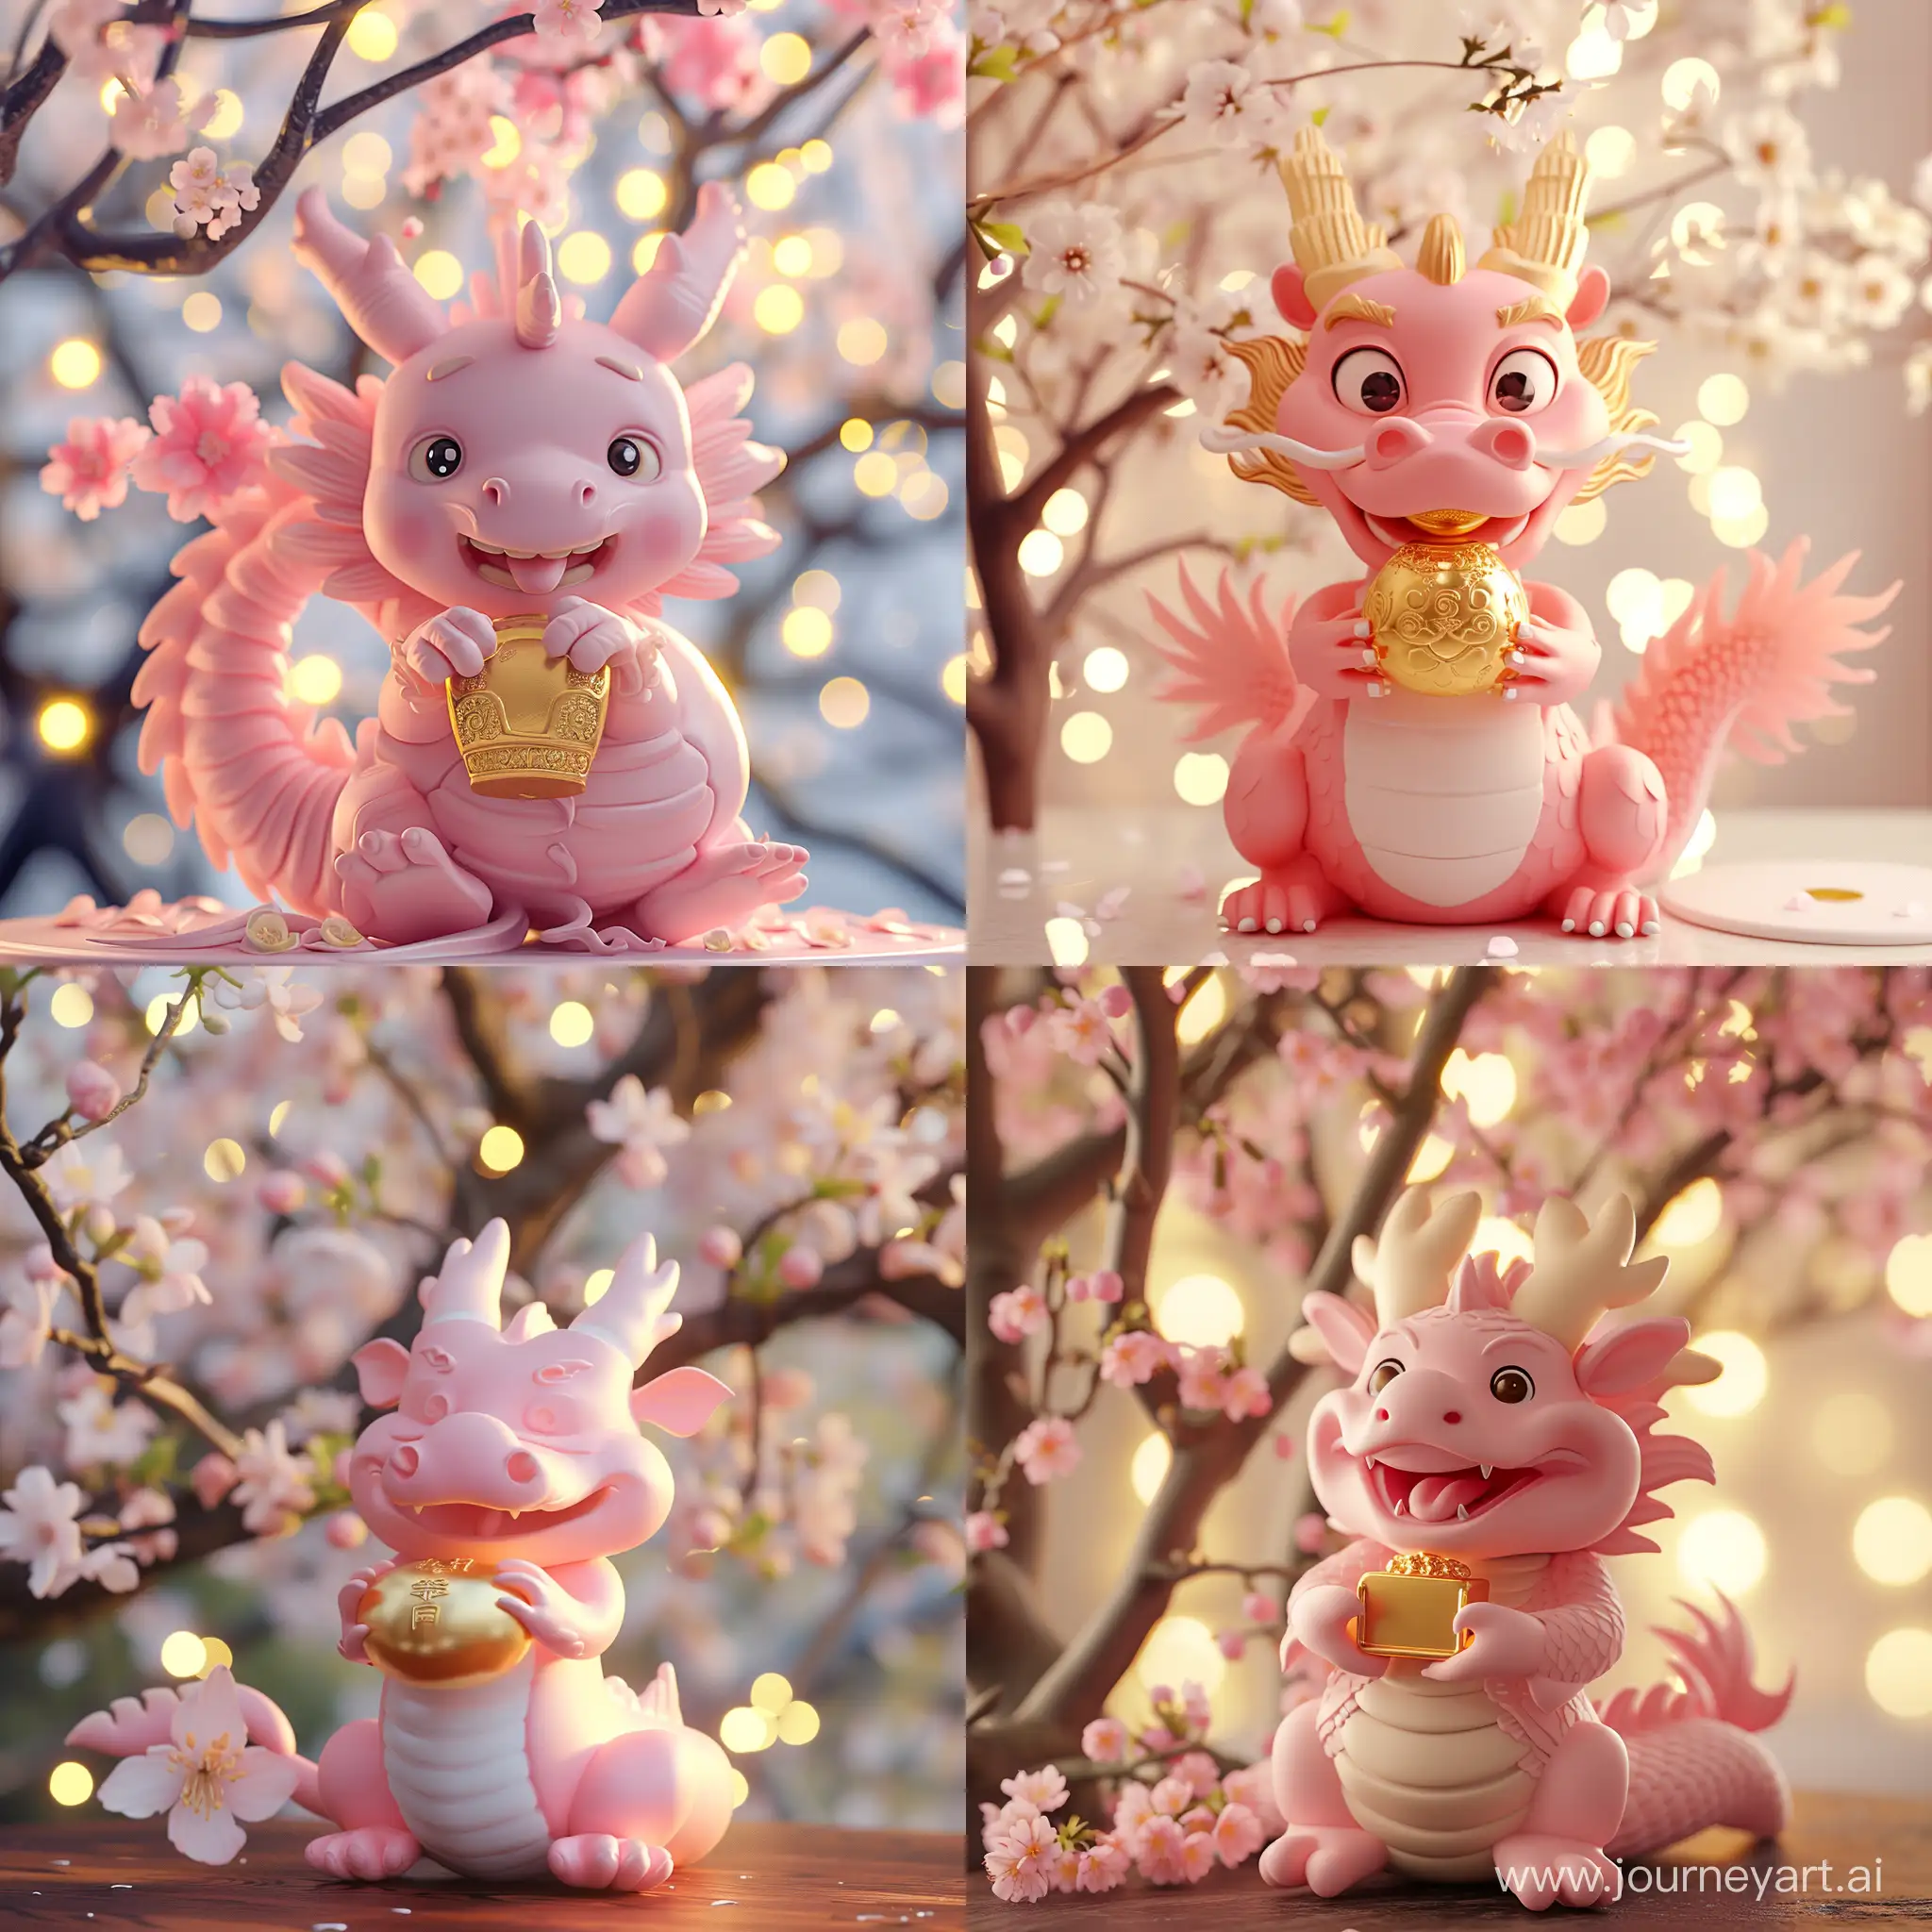 Smiling-Pink-Chinese-Dragon-with-Gold-Ingot-Surrounded-by-Spring-Blossoms